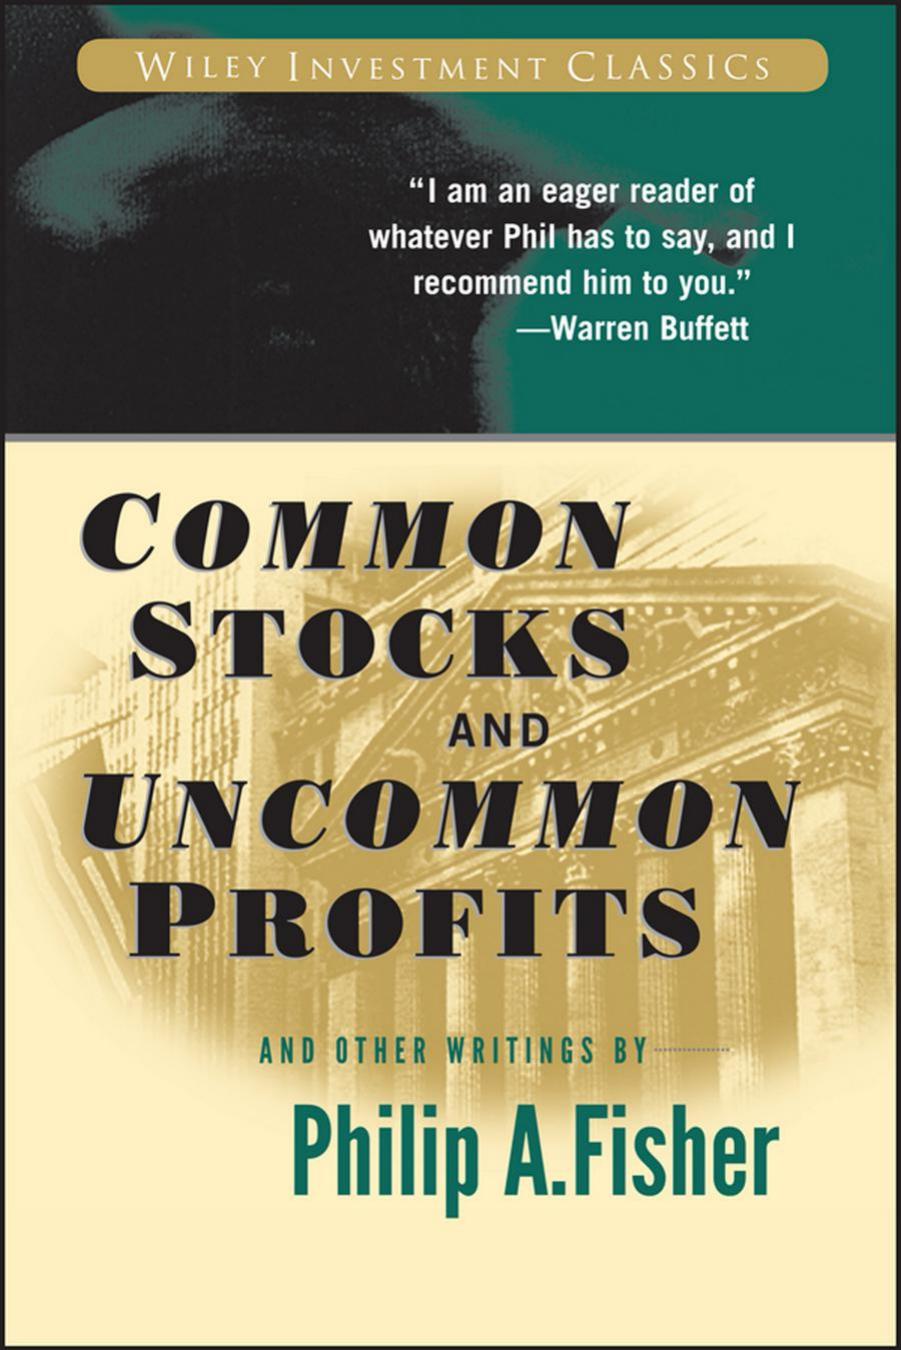 common stocks and uncommon profits and other writings by philip a fisher